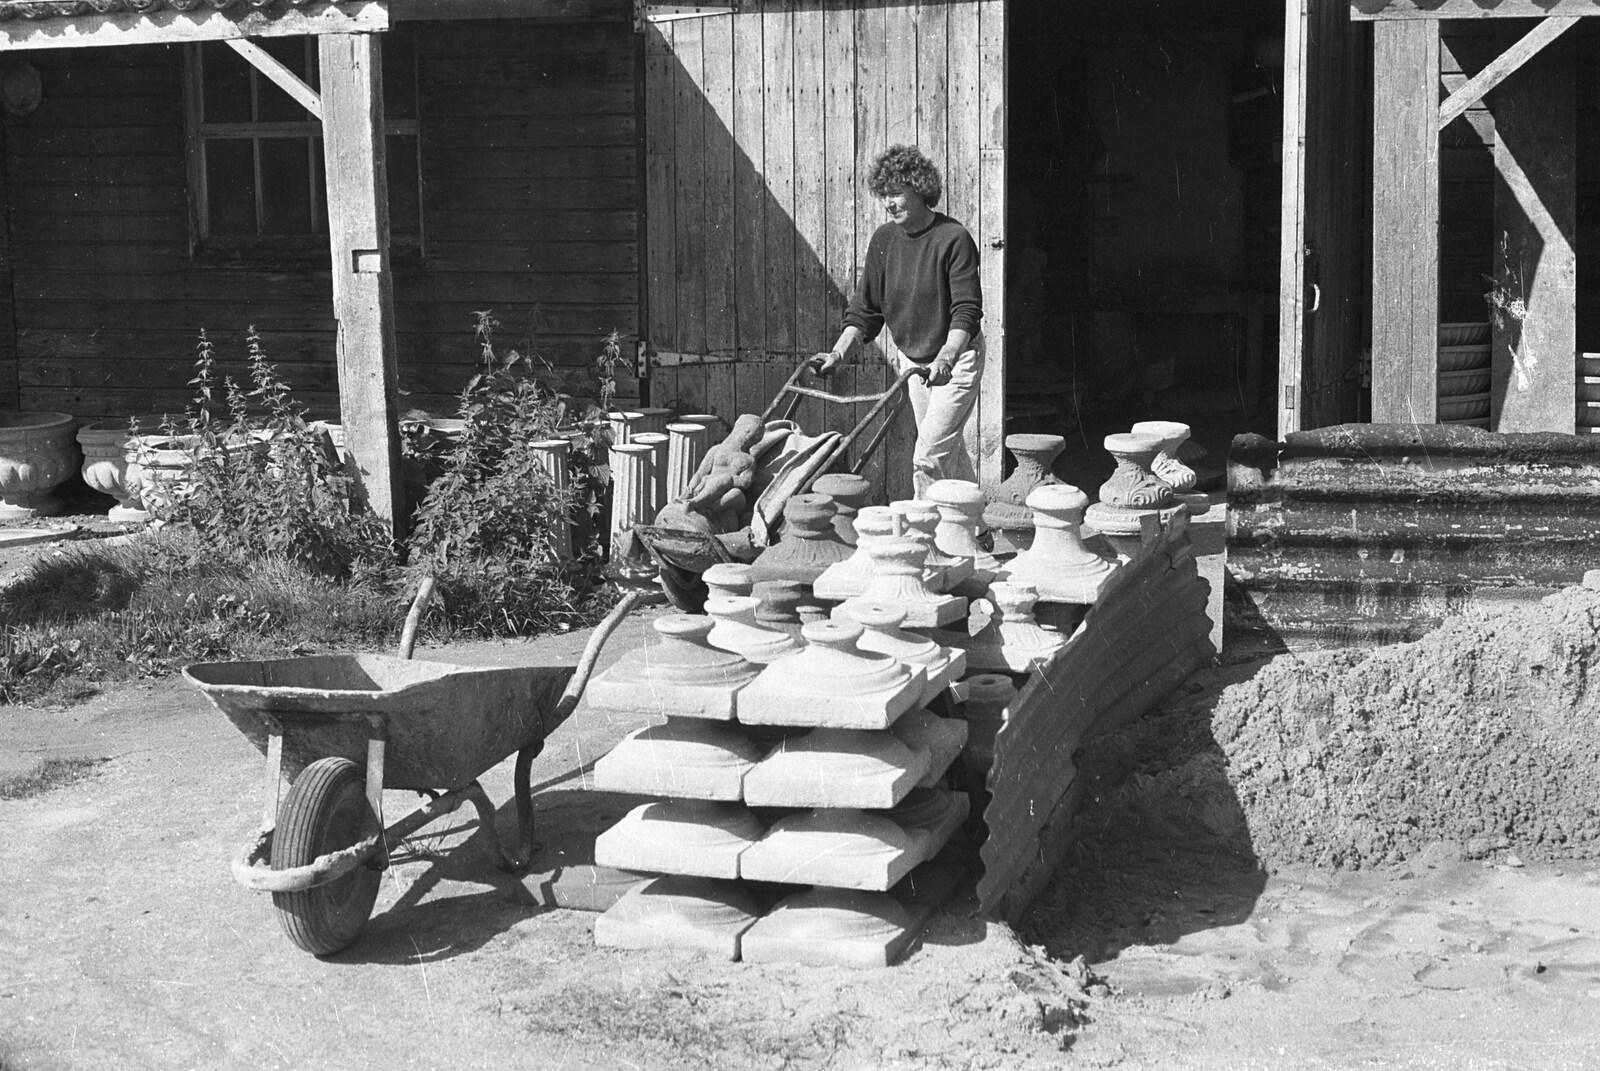 A Black and White Life in Concrete, Stuston, Suffolk - 3rd September 1992: Brenda wheels some ornaments out of the shed